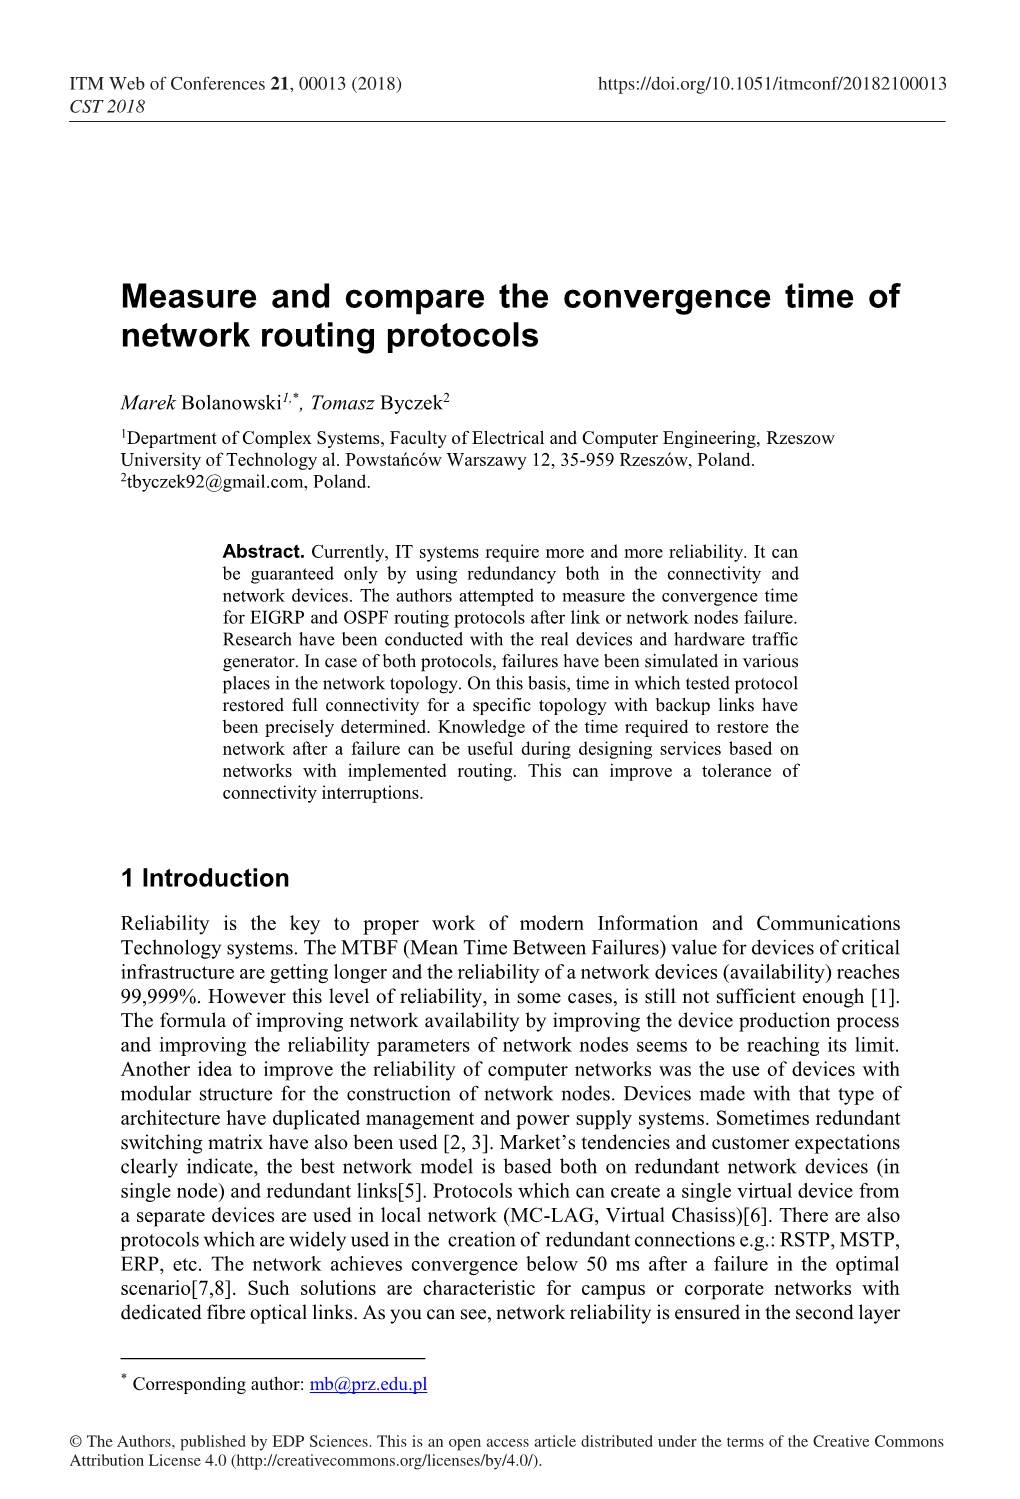 Measure and Compare the Convergence Time of Network Routing Protocols